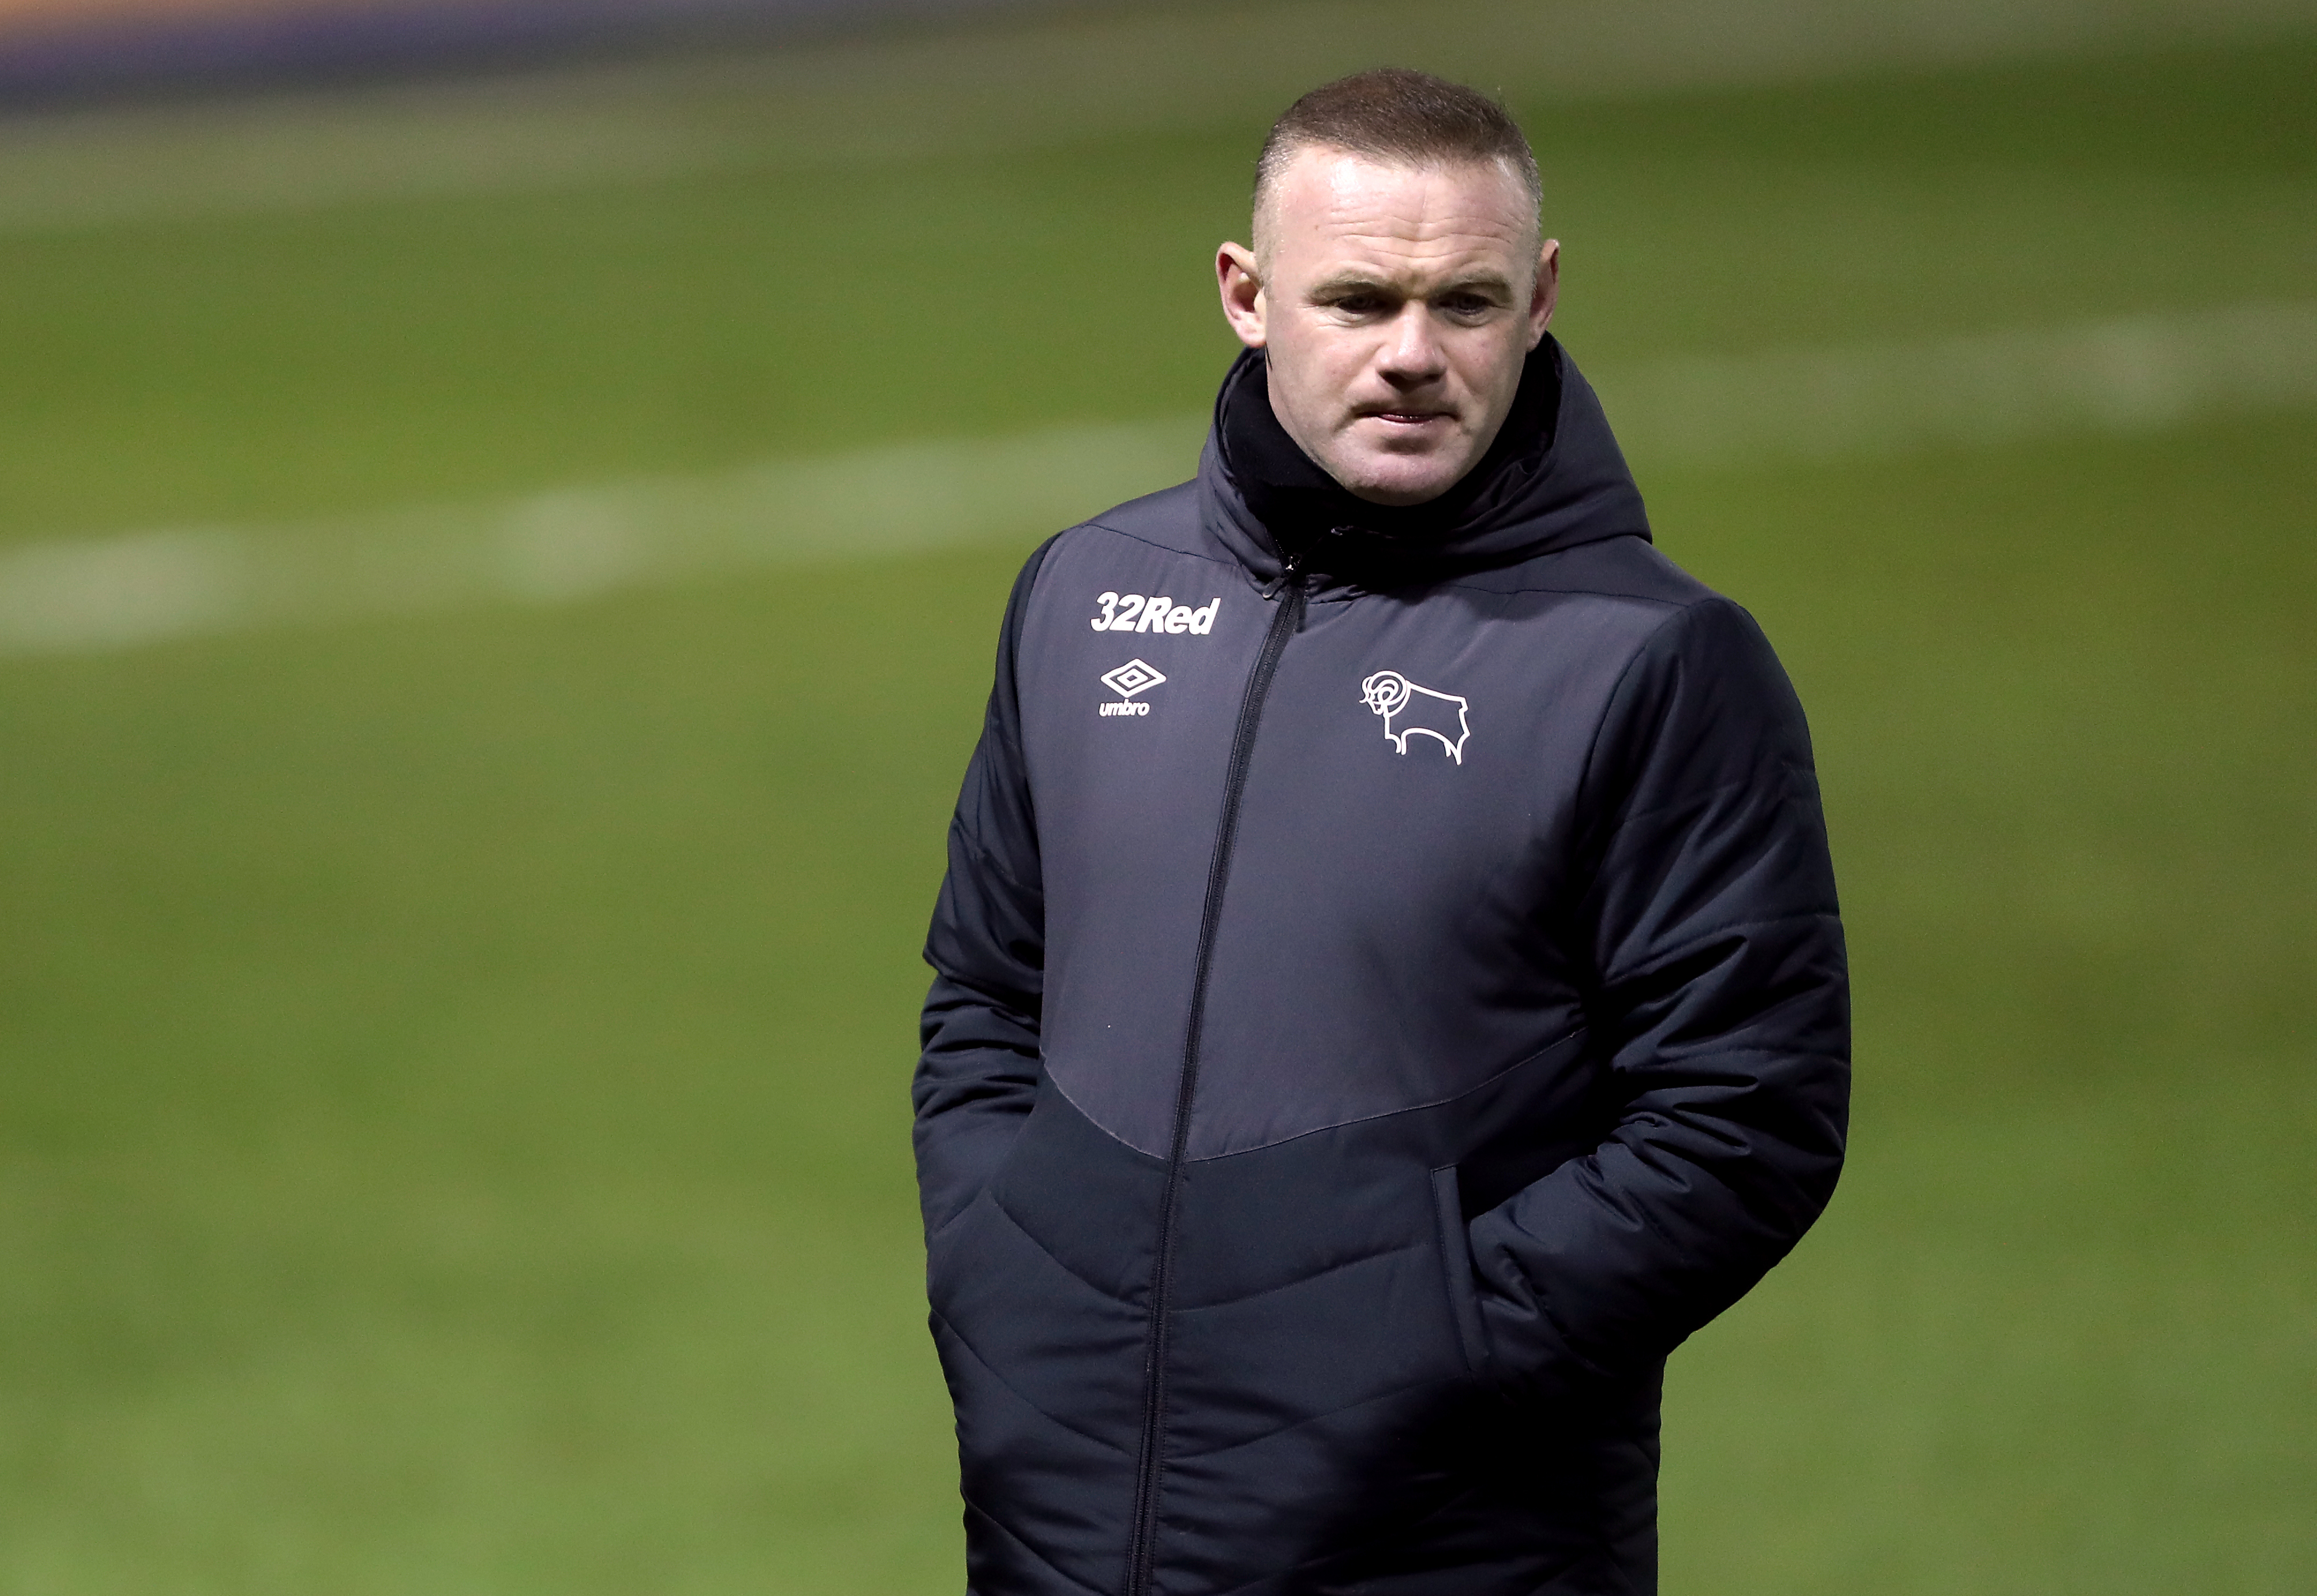 Wayne Rooney Appointed New Manager Of Derby County Fc Central Itv News